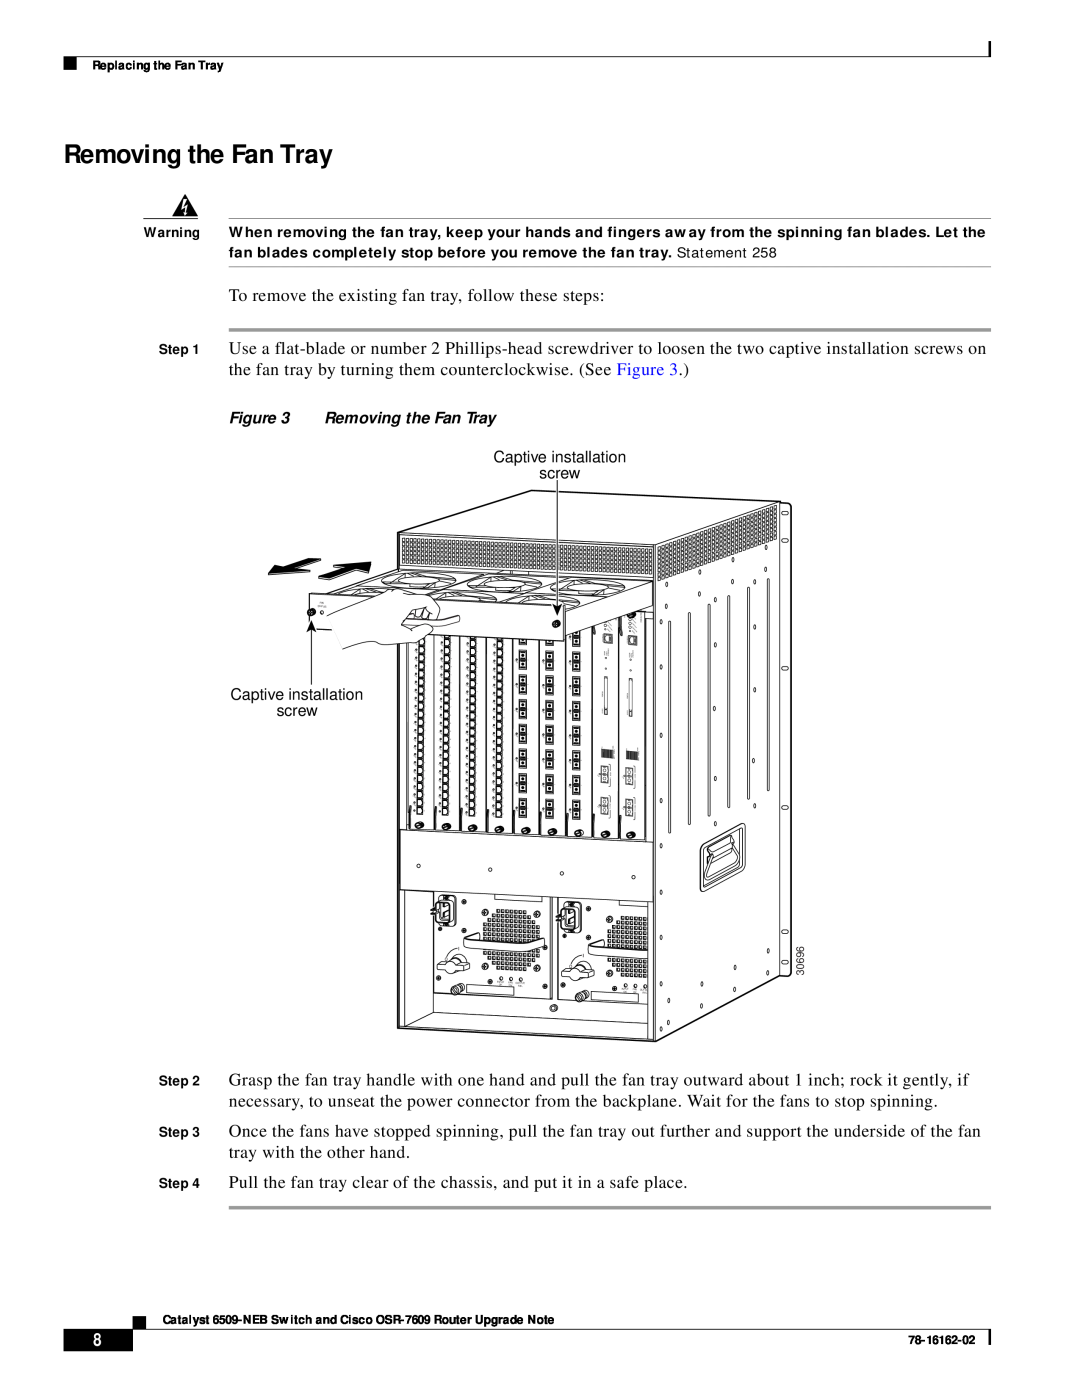 Cisco Systems 6509-NEB, OSR-7609 manual Removing the Fan Tray 